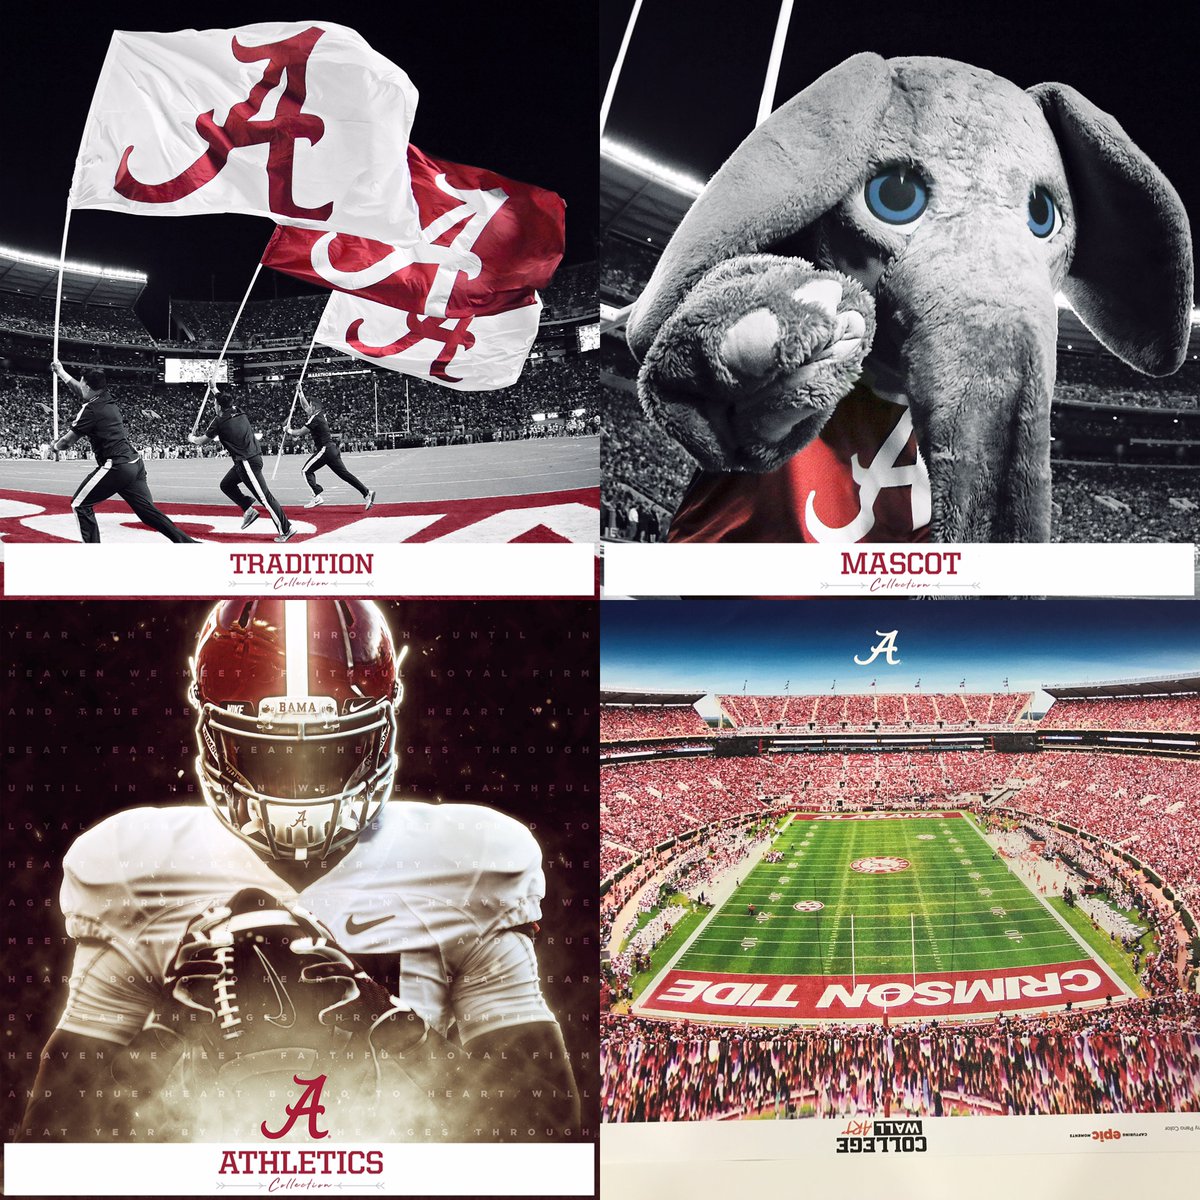 Bama - Roll Tide. Visit our site for more Alabama Products. collegewallart.com